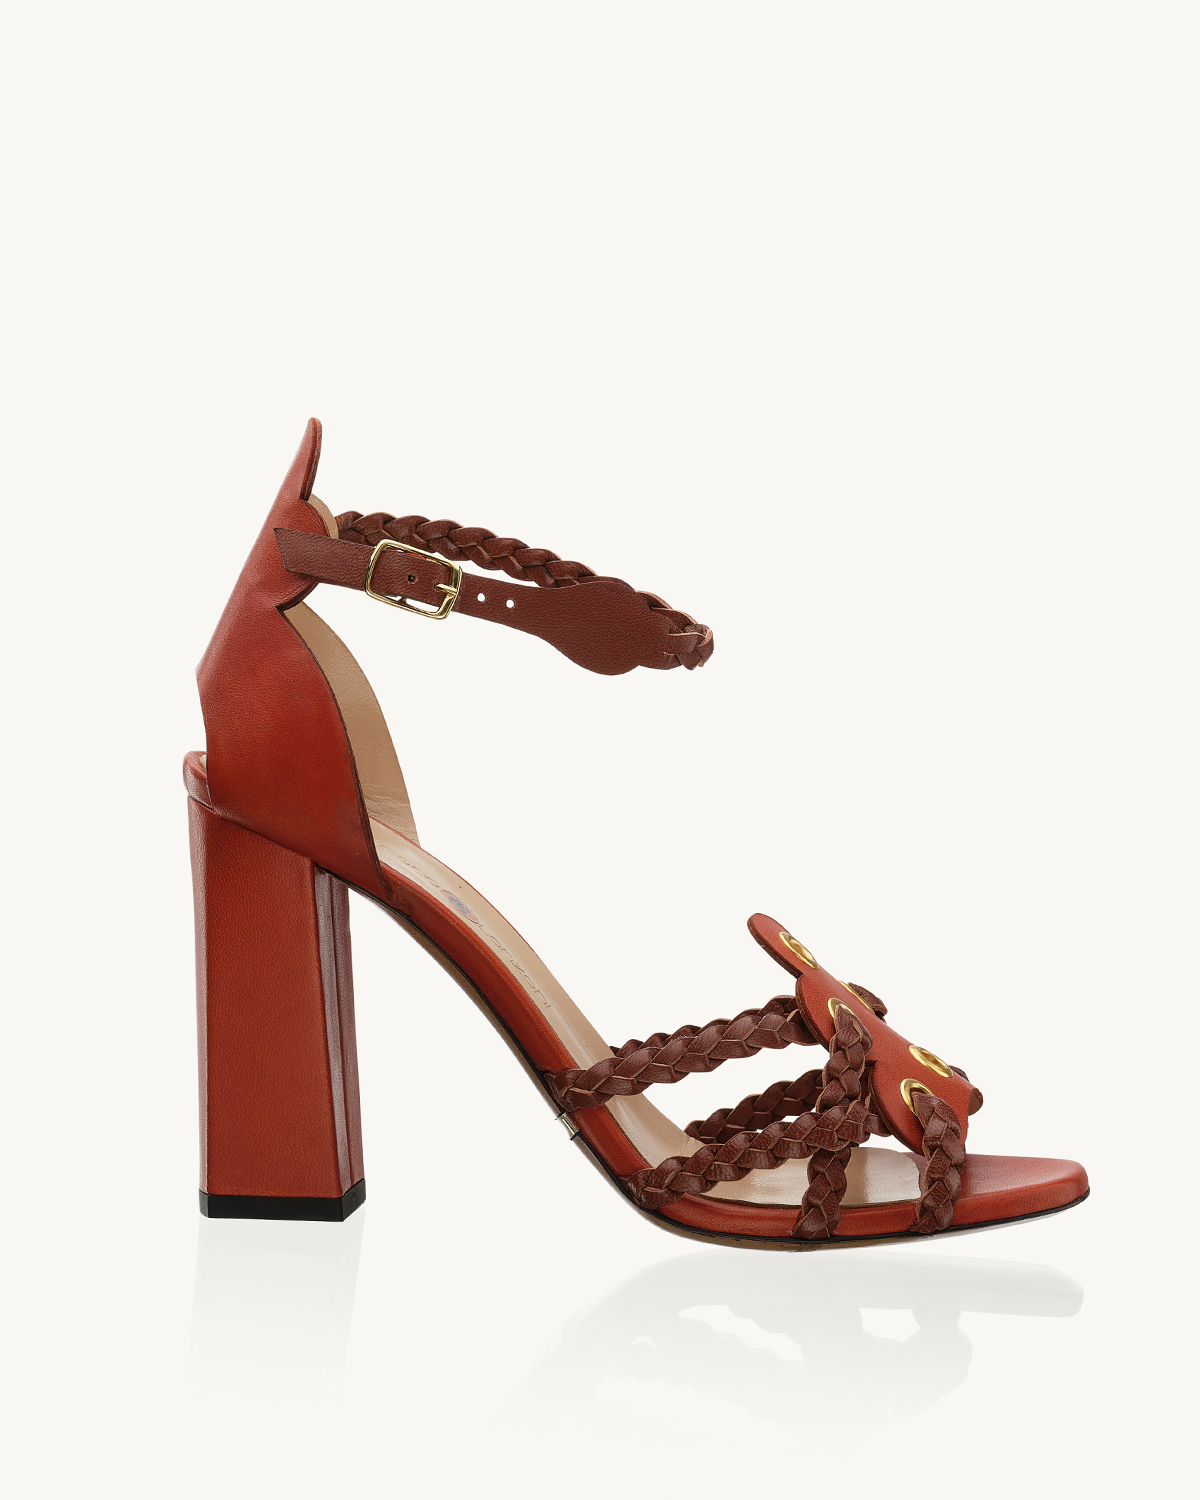 Kalea 90 heel sandal in rust nappa leather with soft braids in brown nappa Francesco Lanzoni Shoes